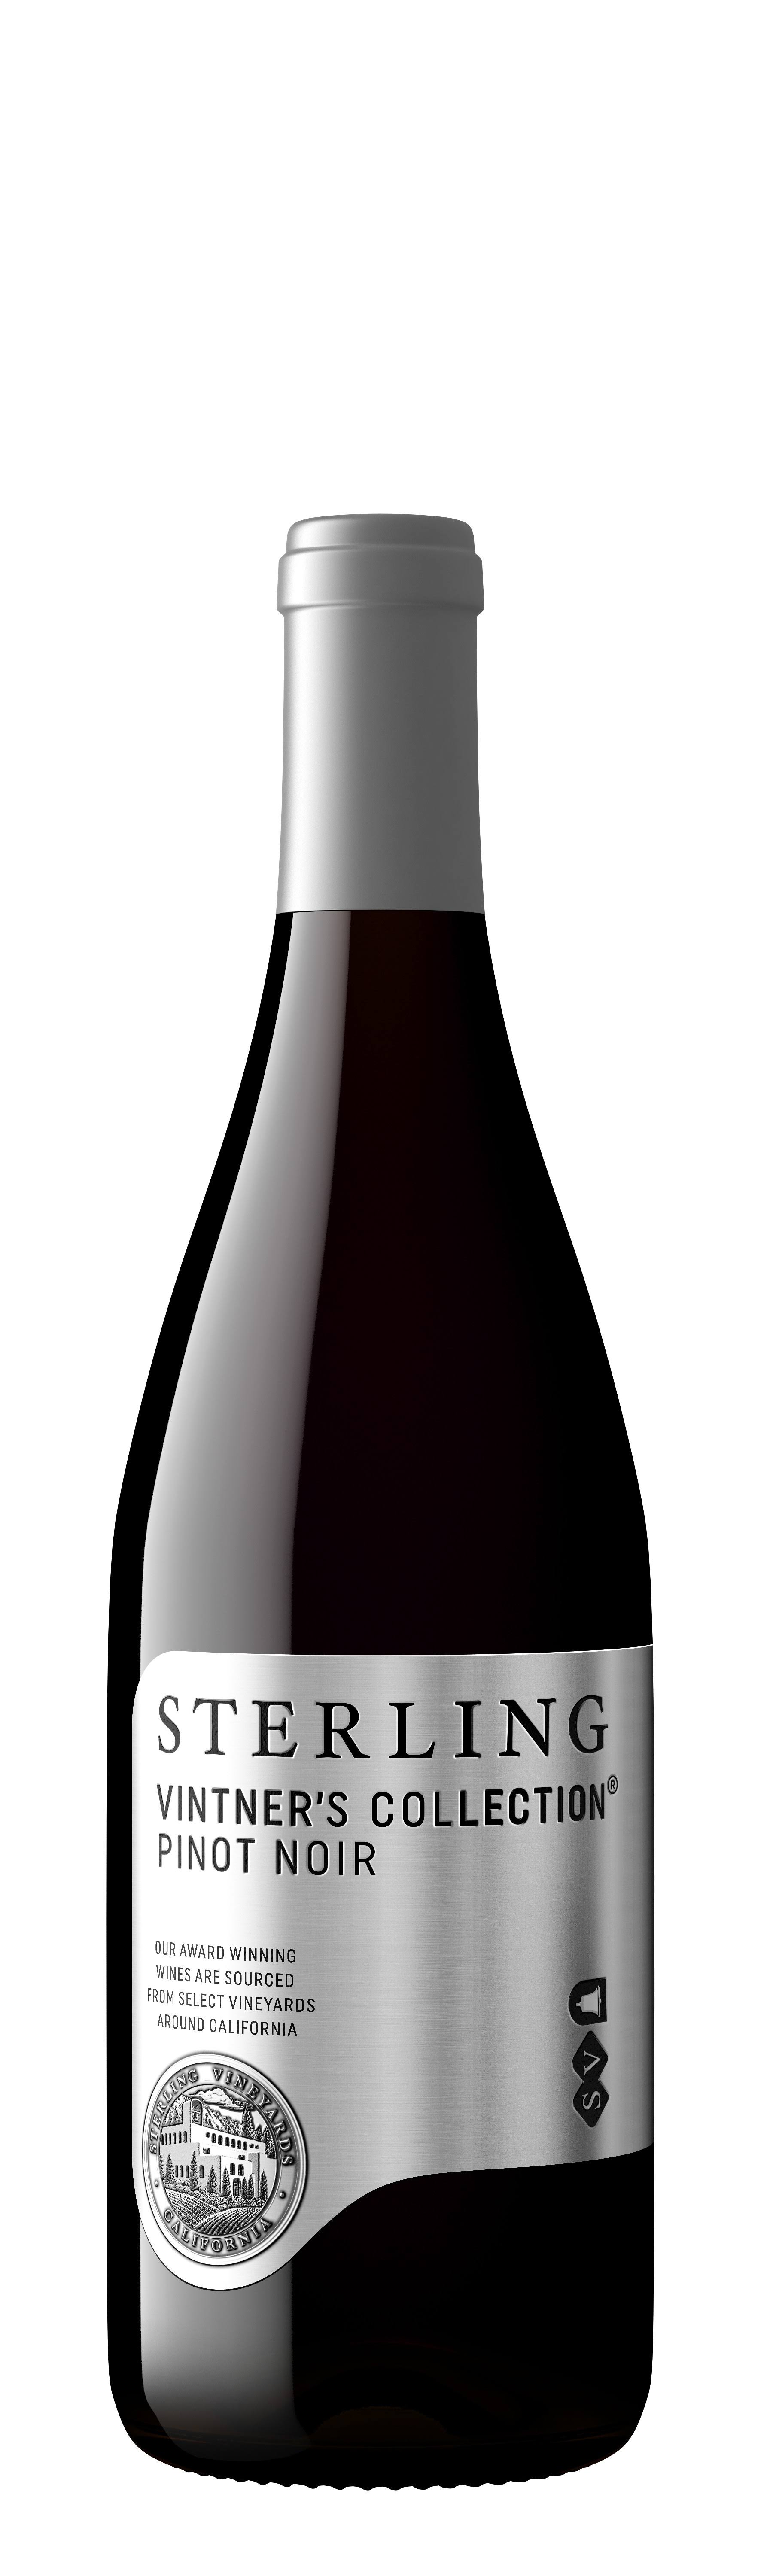 Sterling 'Vintner's Collection' Pinot Noir 2019 United States / 750ML